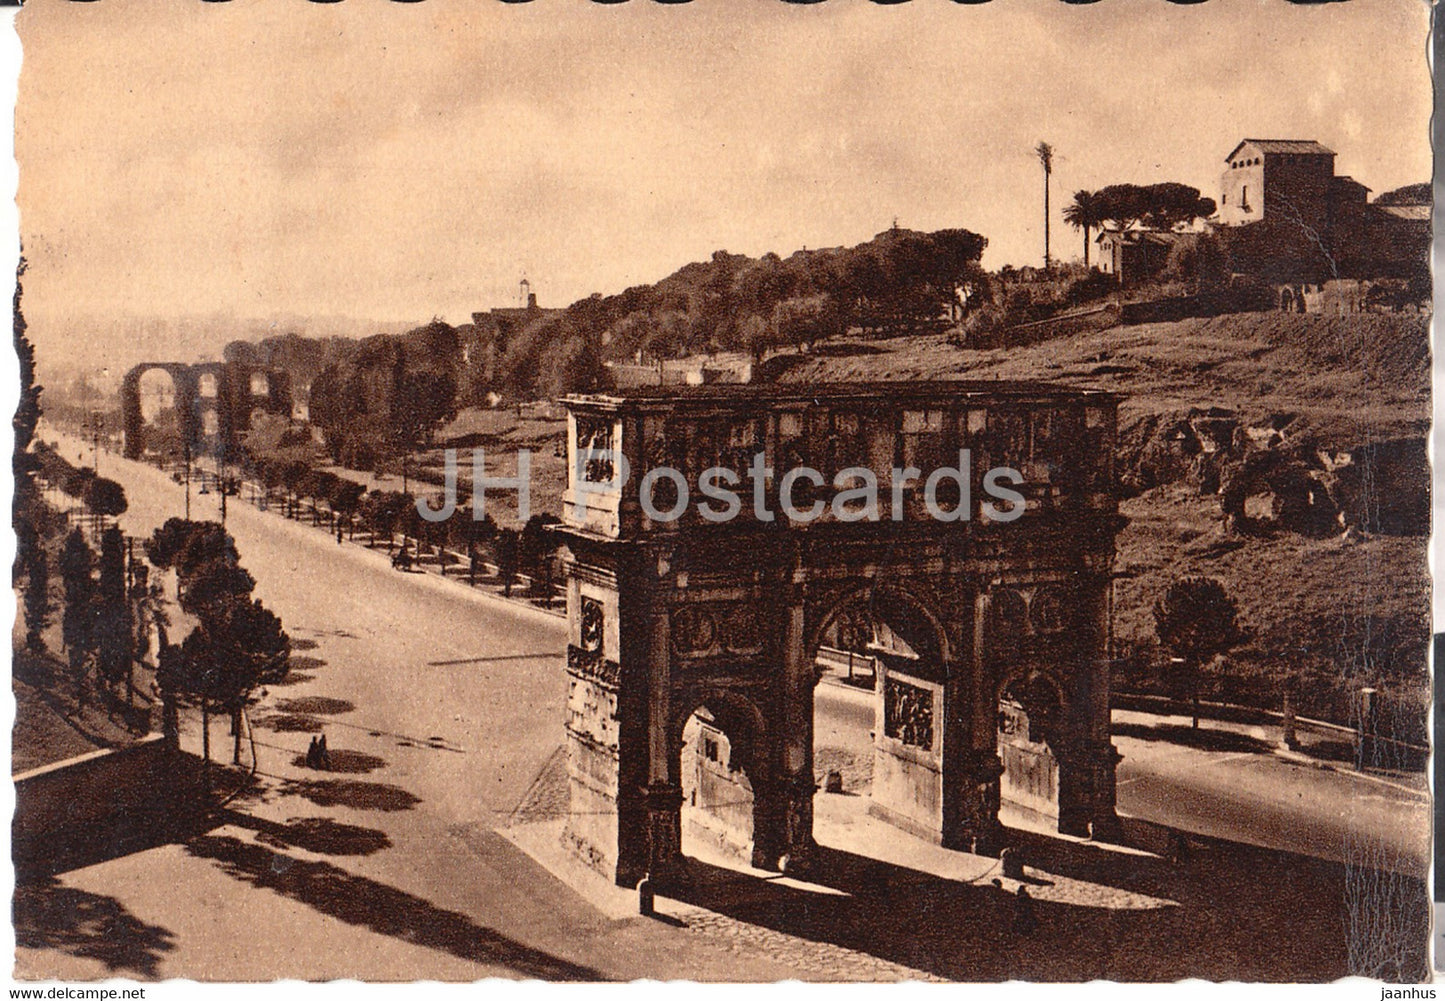 Roma - Rome - Arco di Costantino - The Arc of Constantine - old postcard - 1955 - Italy - used - JH Postcards